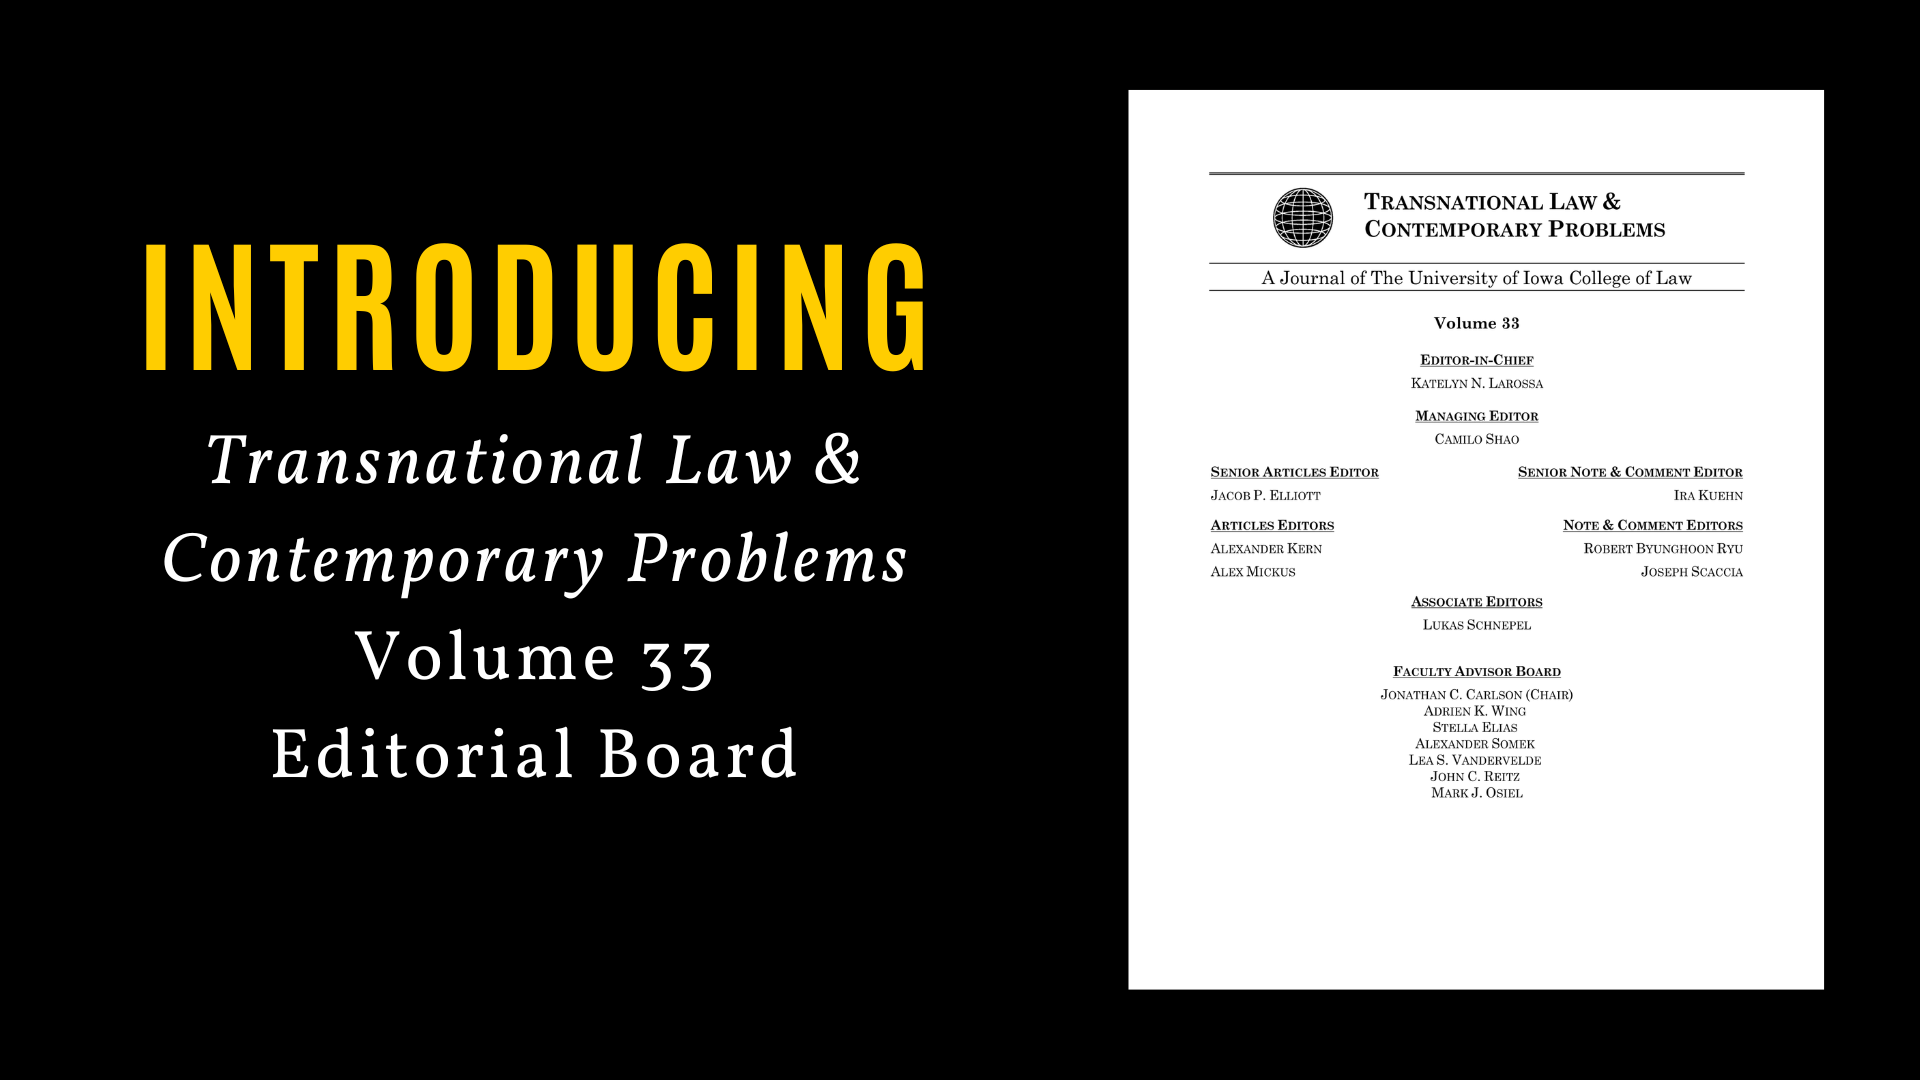 Introducing Transnational Law and Contemporary Problems Volume 33 Editorial Board